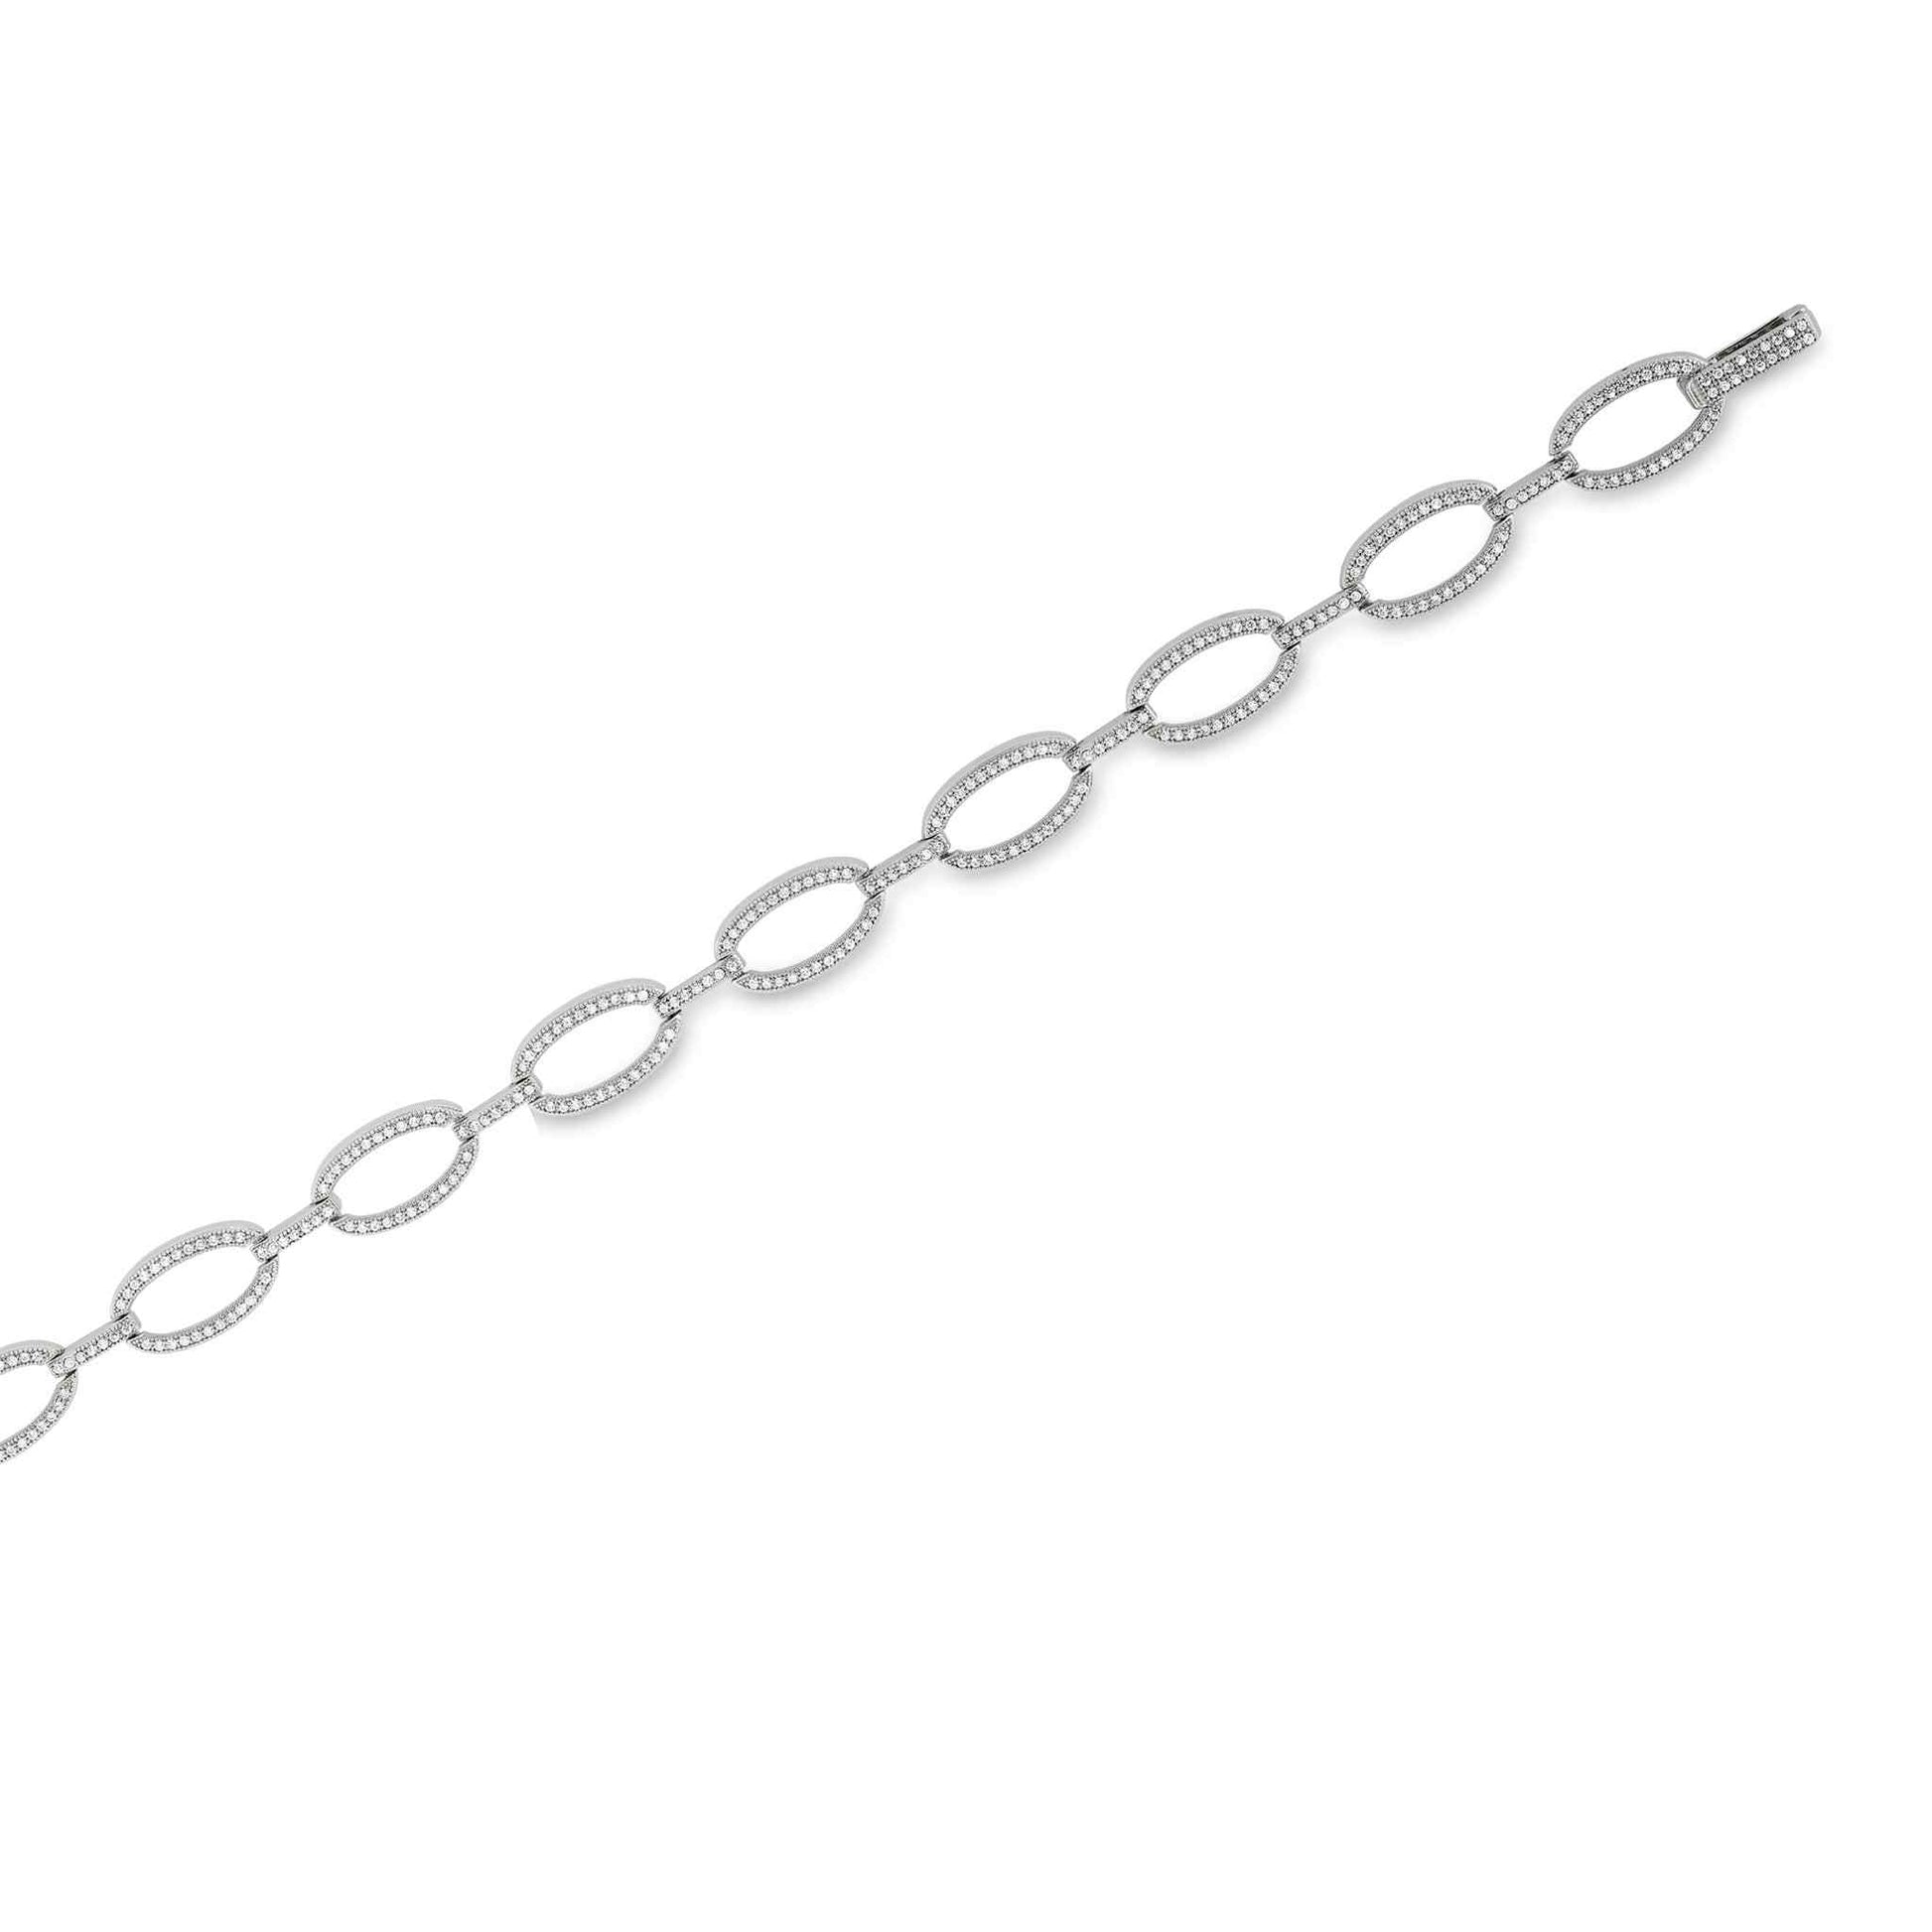 A oval link bracelet with simulated diamonds displayed on a neutral white background.